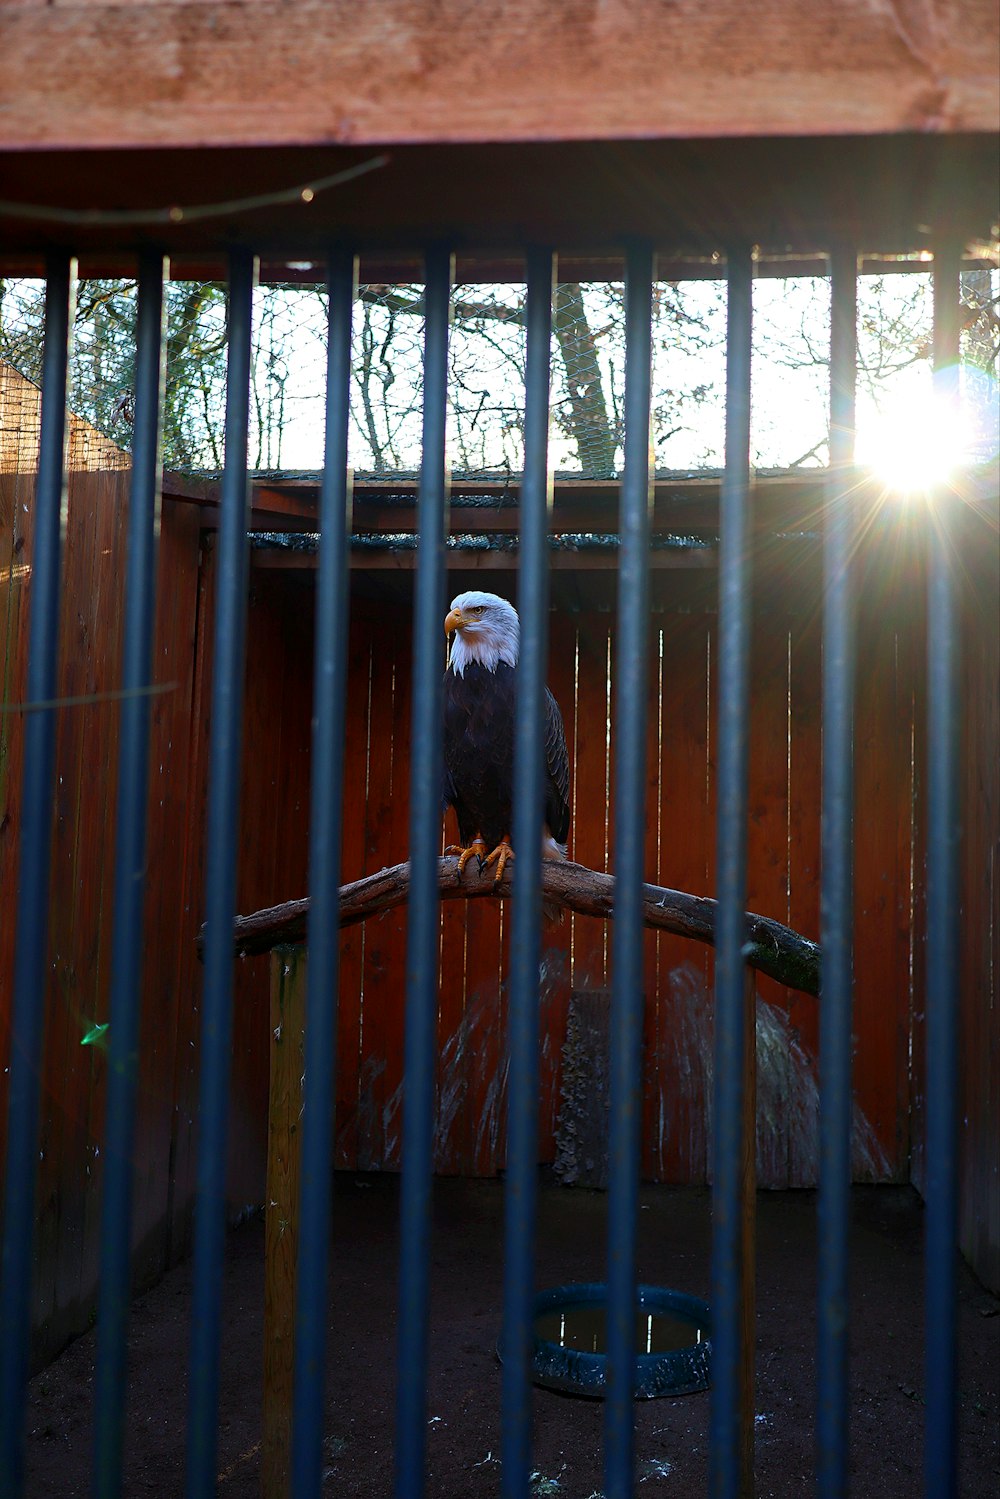 an eagle sitting on a tree branch in a cage